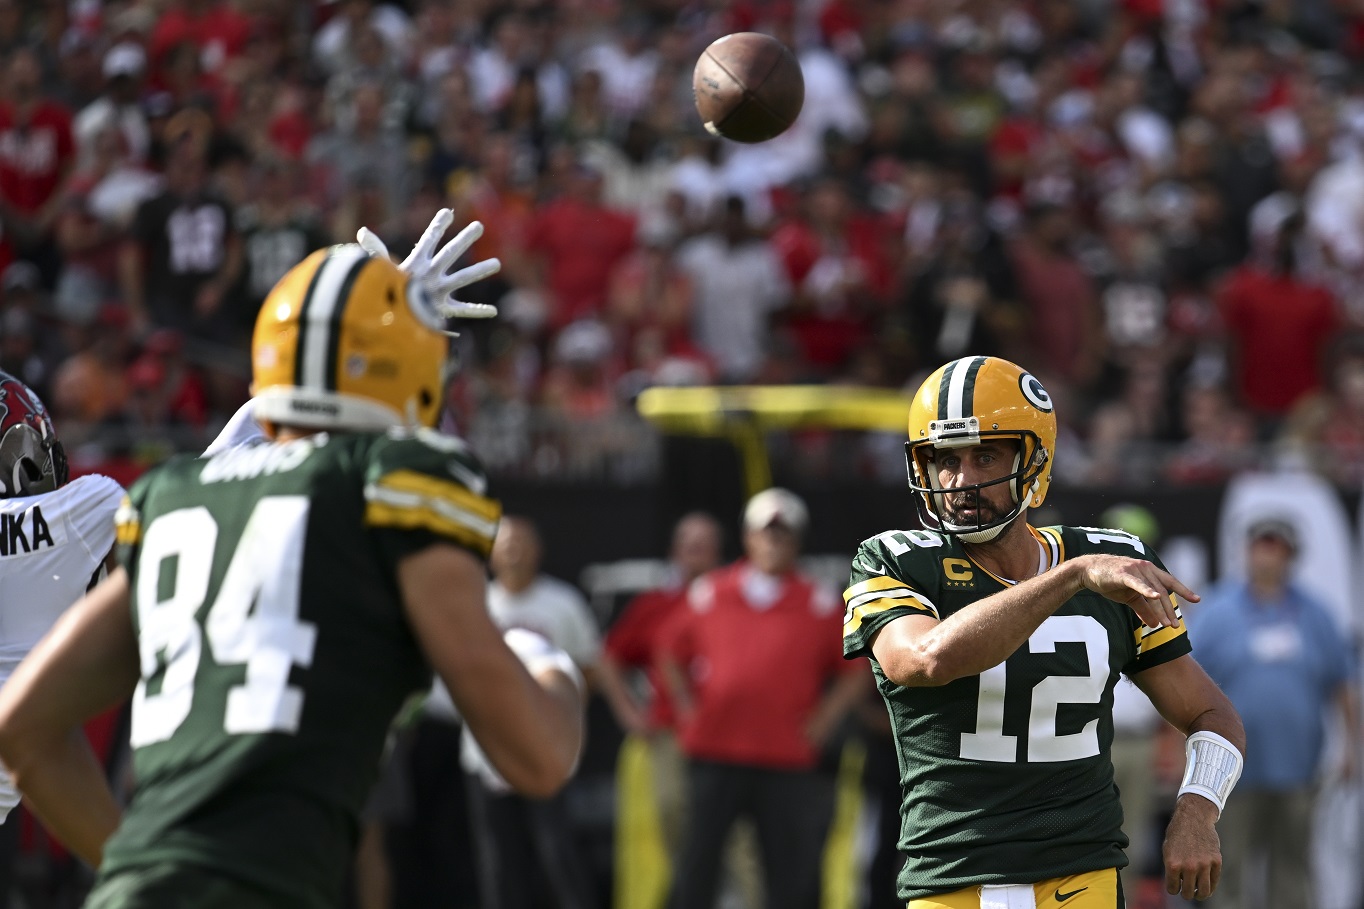 Rodgers throws for 2 TDs, Packers hold off Brady, Bucs 14-12